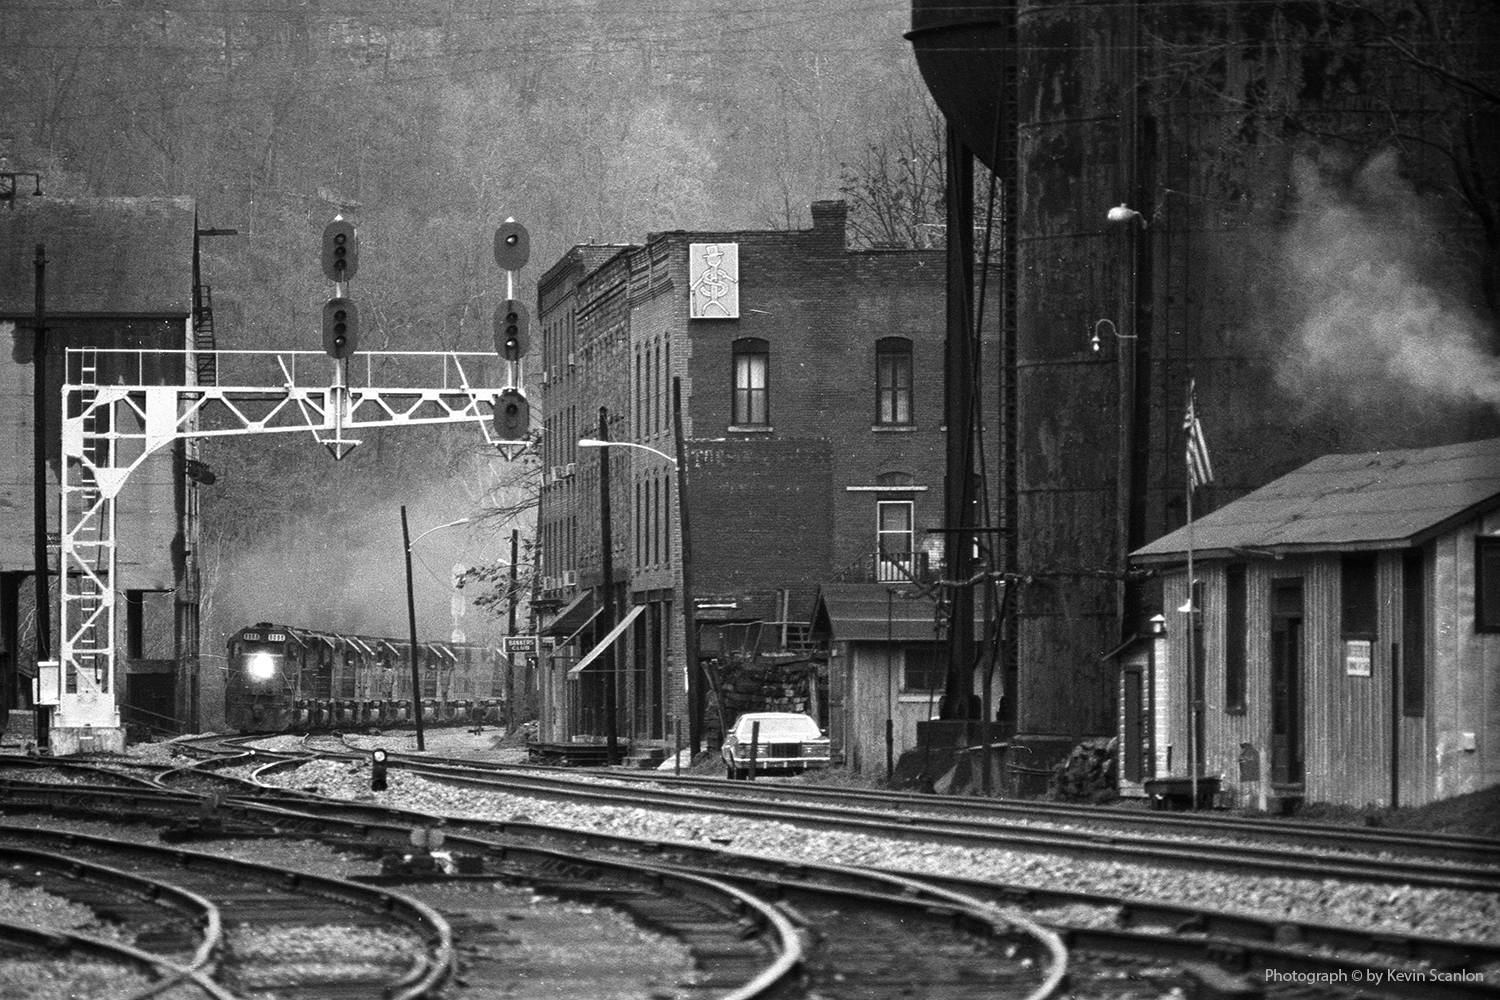 B/W images of train tracks and buildings in WV